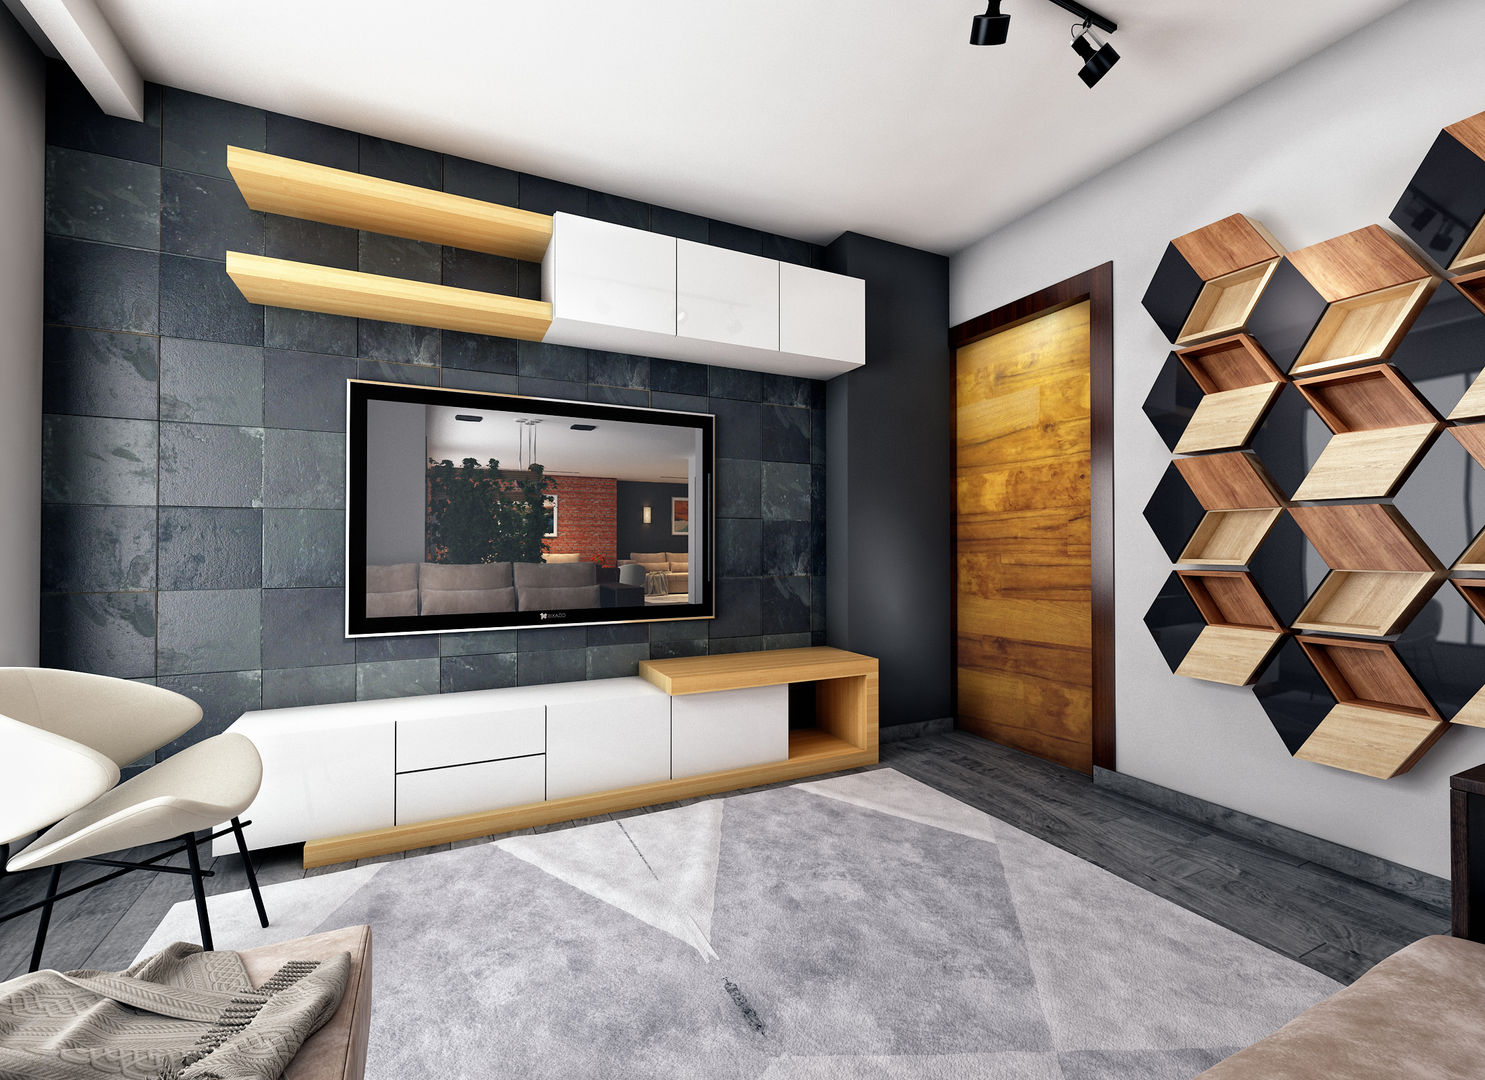 Apartment Interior in East Town Sodic, Zoning Architects Zoning Architects 모던스타일 거실